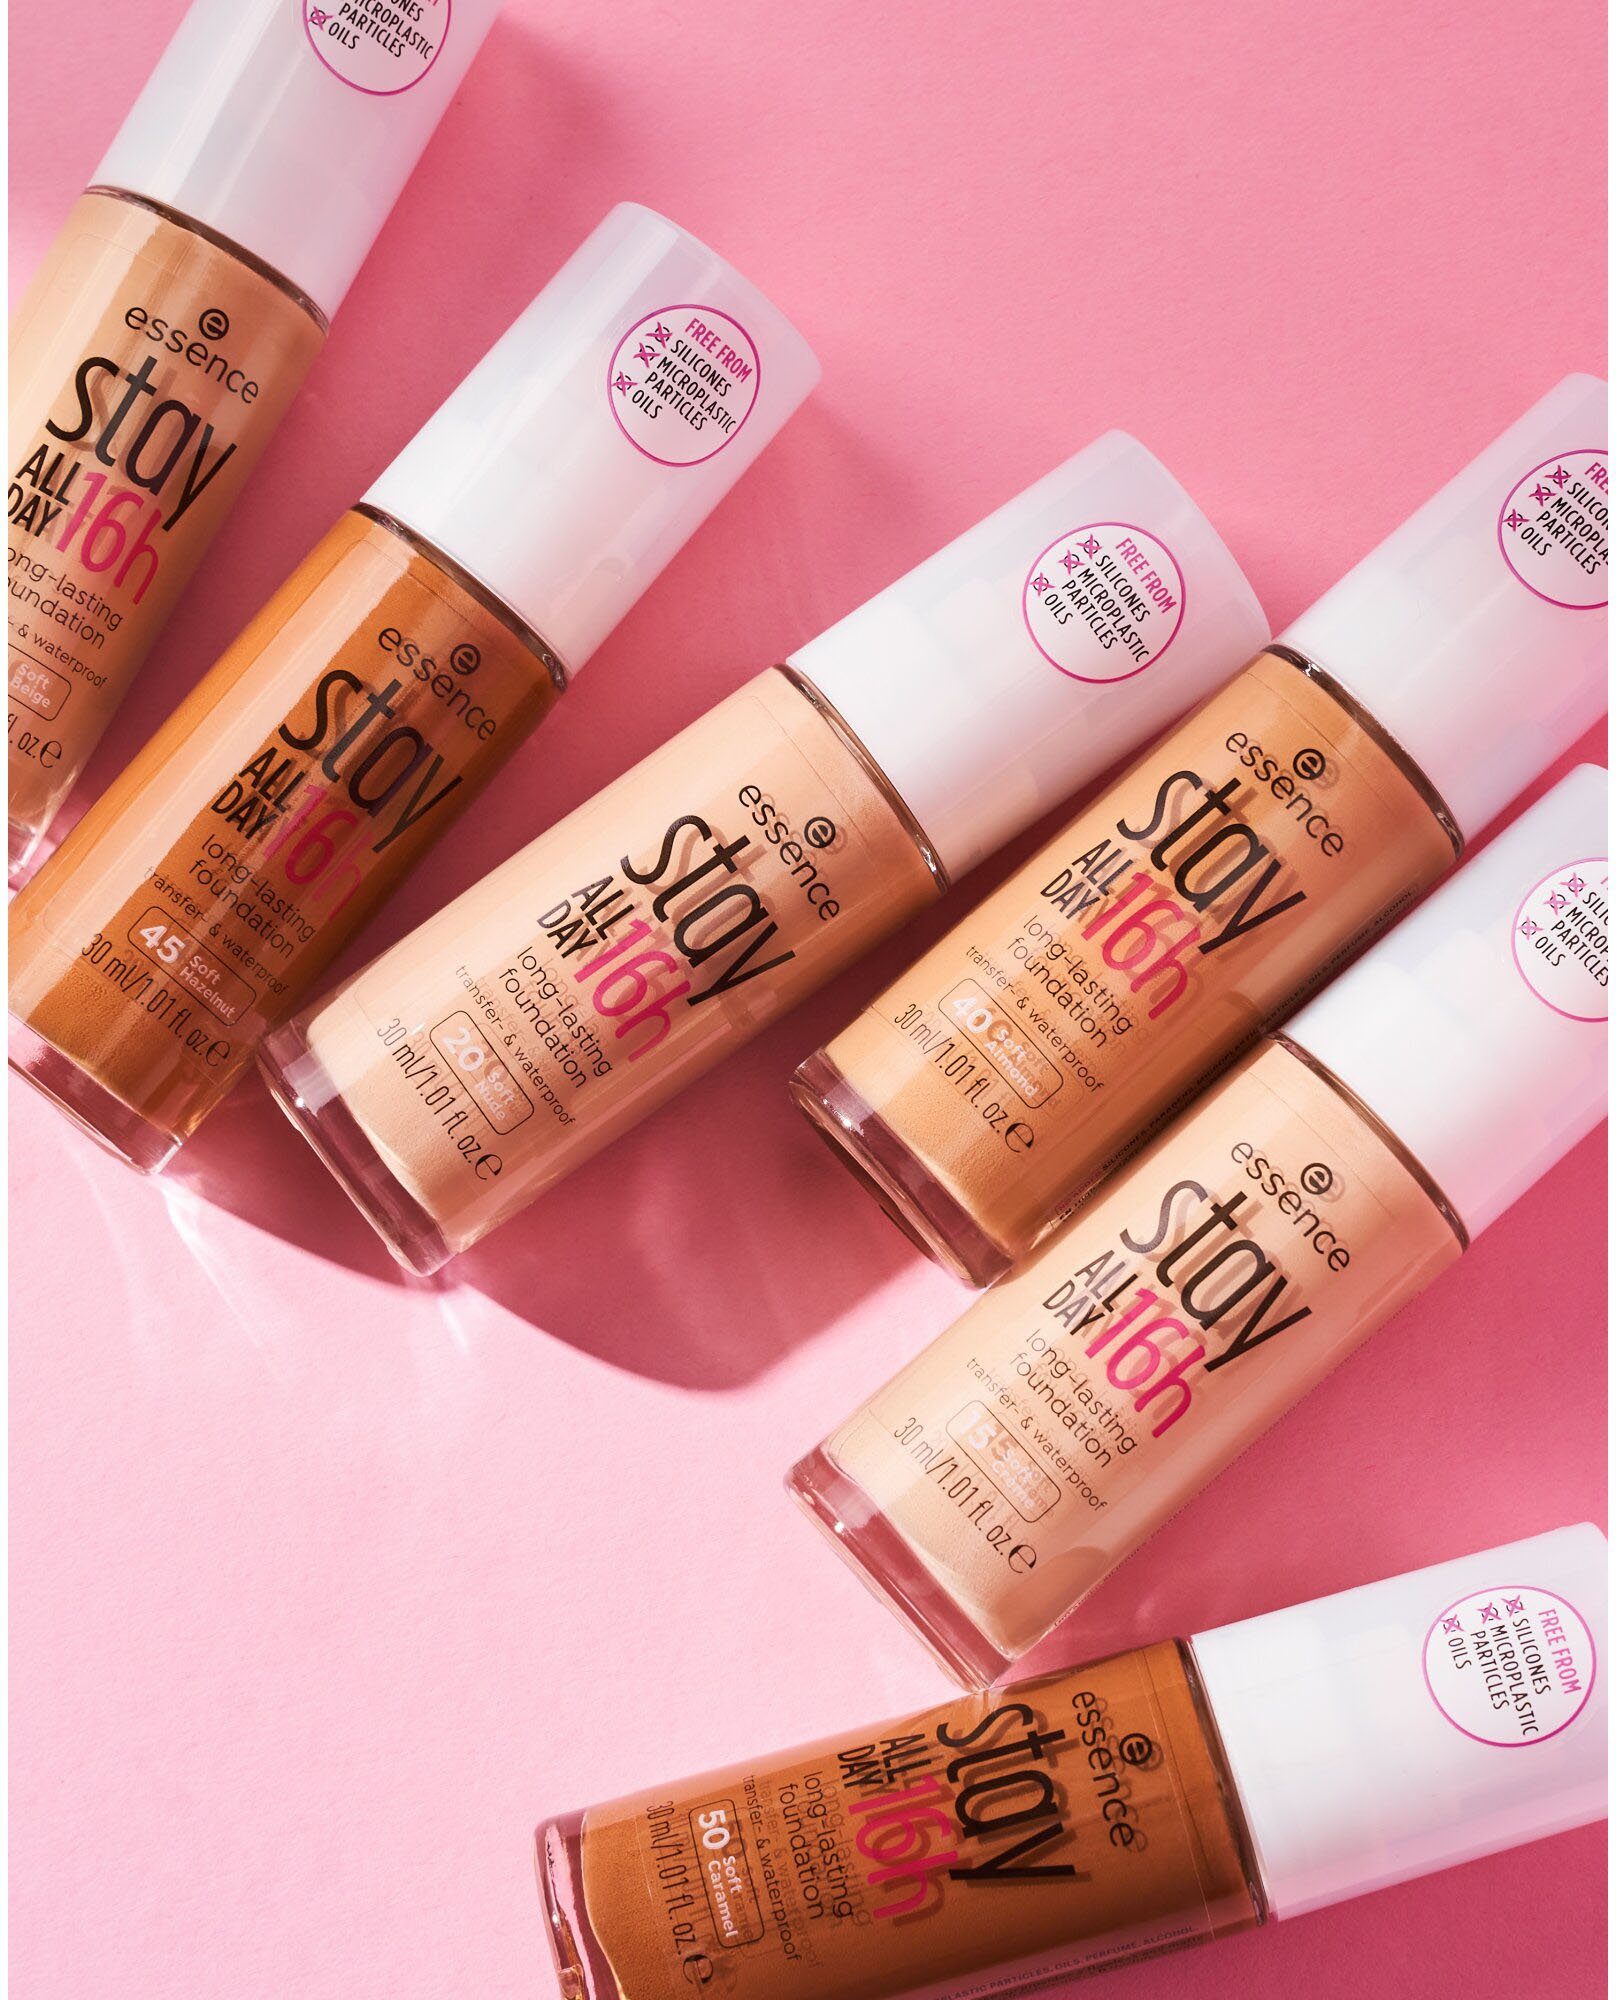 long-lasting, Soft Essence 16h Foundation 3-tlg. DAY Nude ALL stay